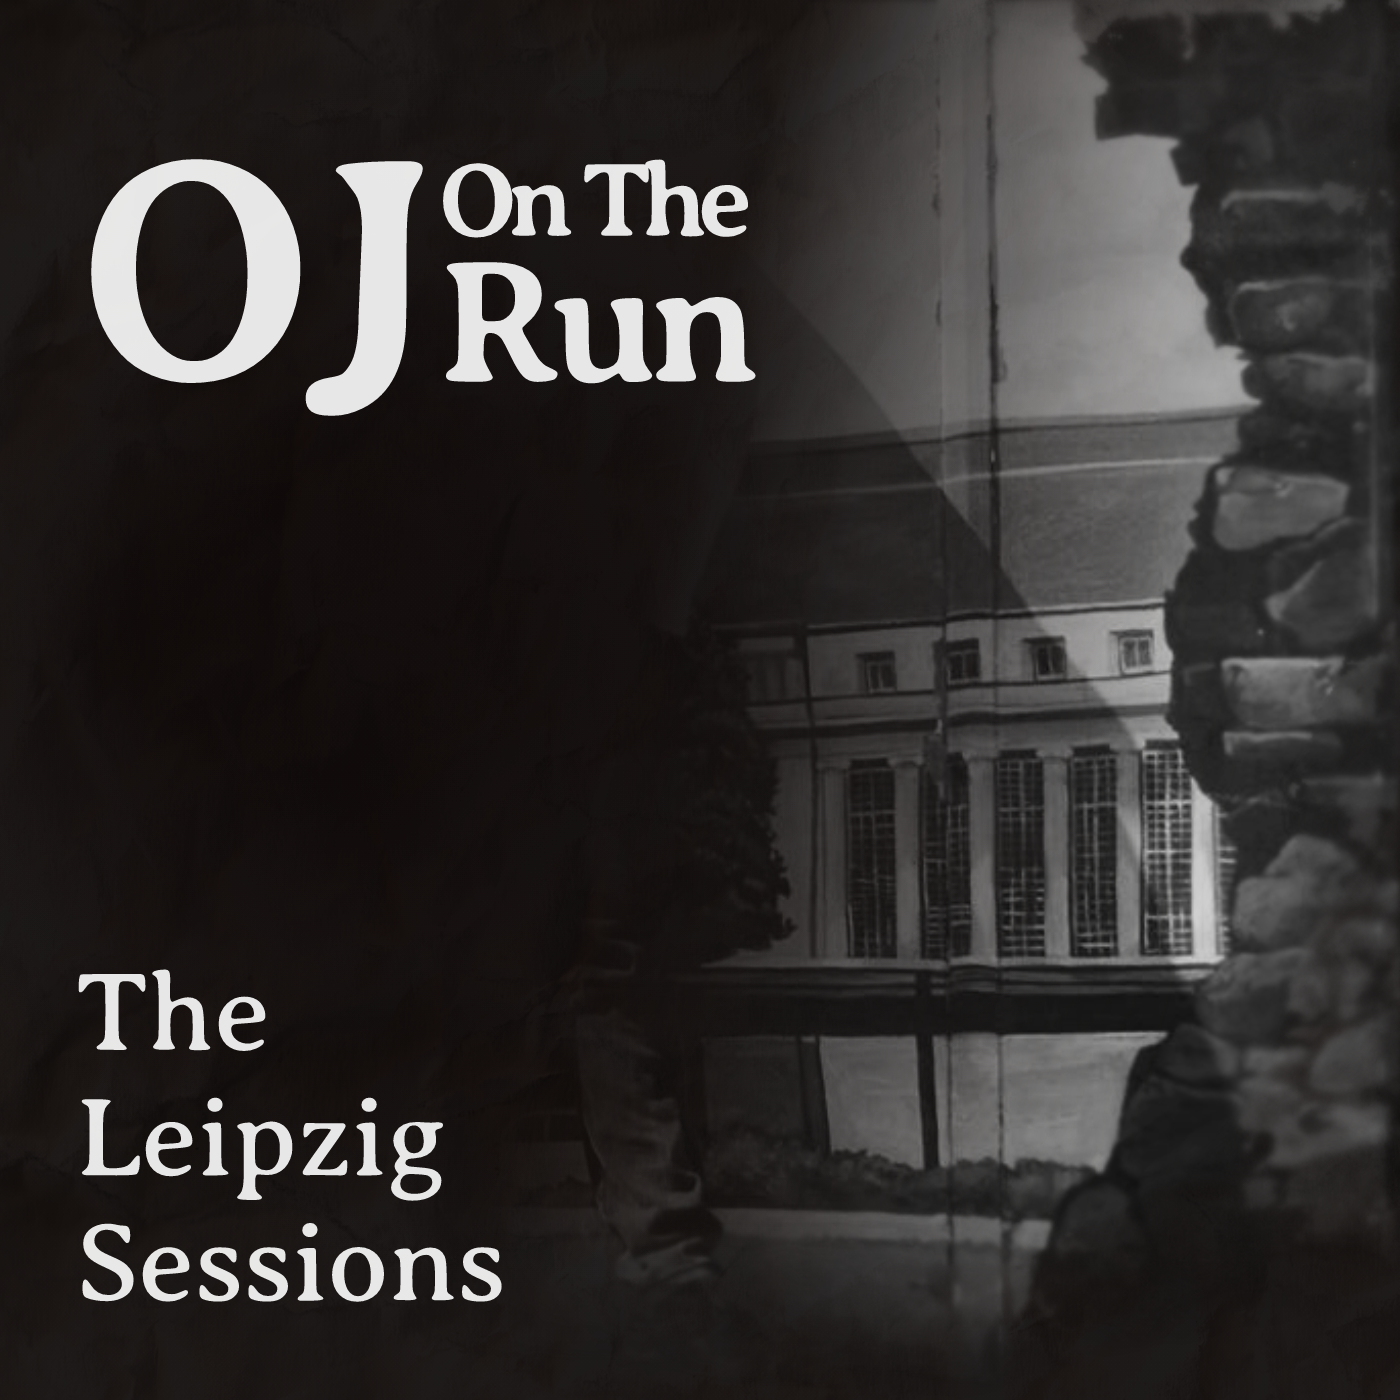 Cover art for the album, The Leipzig Sessions, by British indie-pop/indie-rock band, OJ On The Run